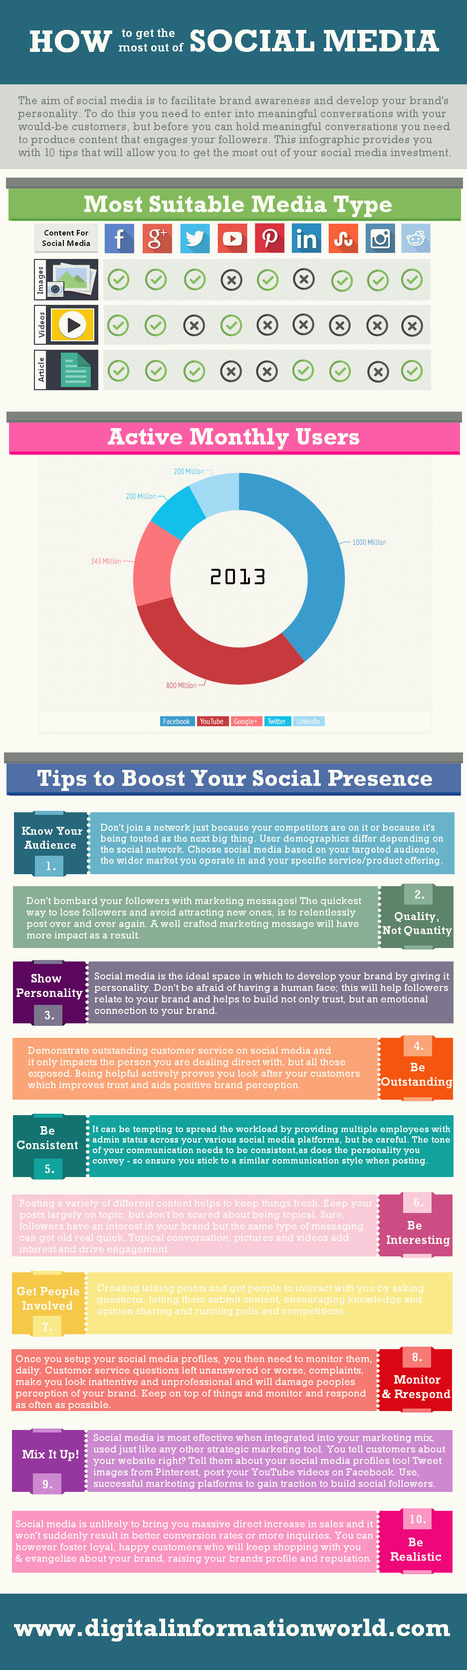 Get The Most Out Of Social Media | Infographic | :: The 4th Era :: | Scoop.it